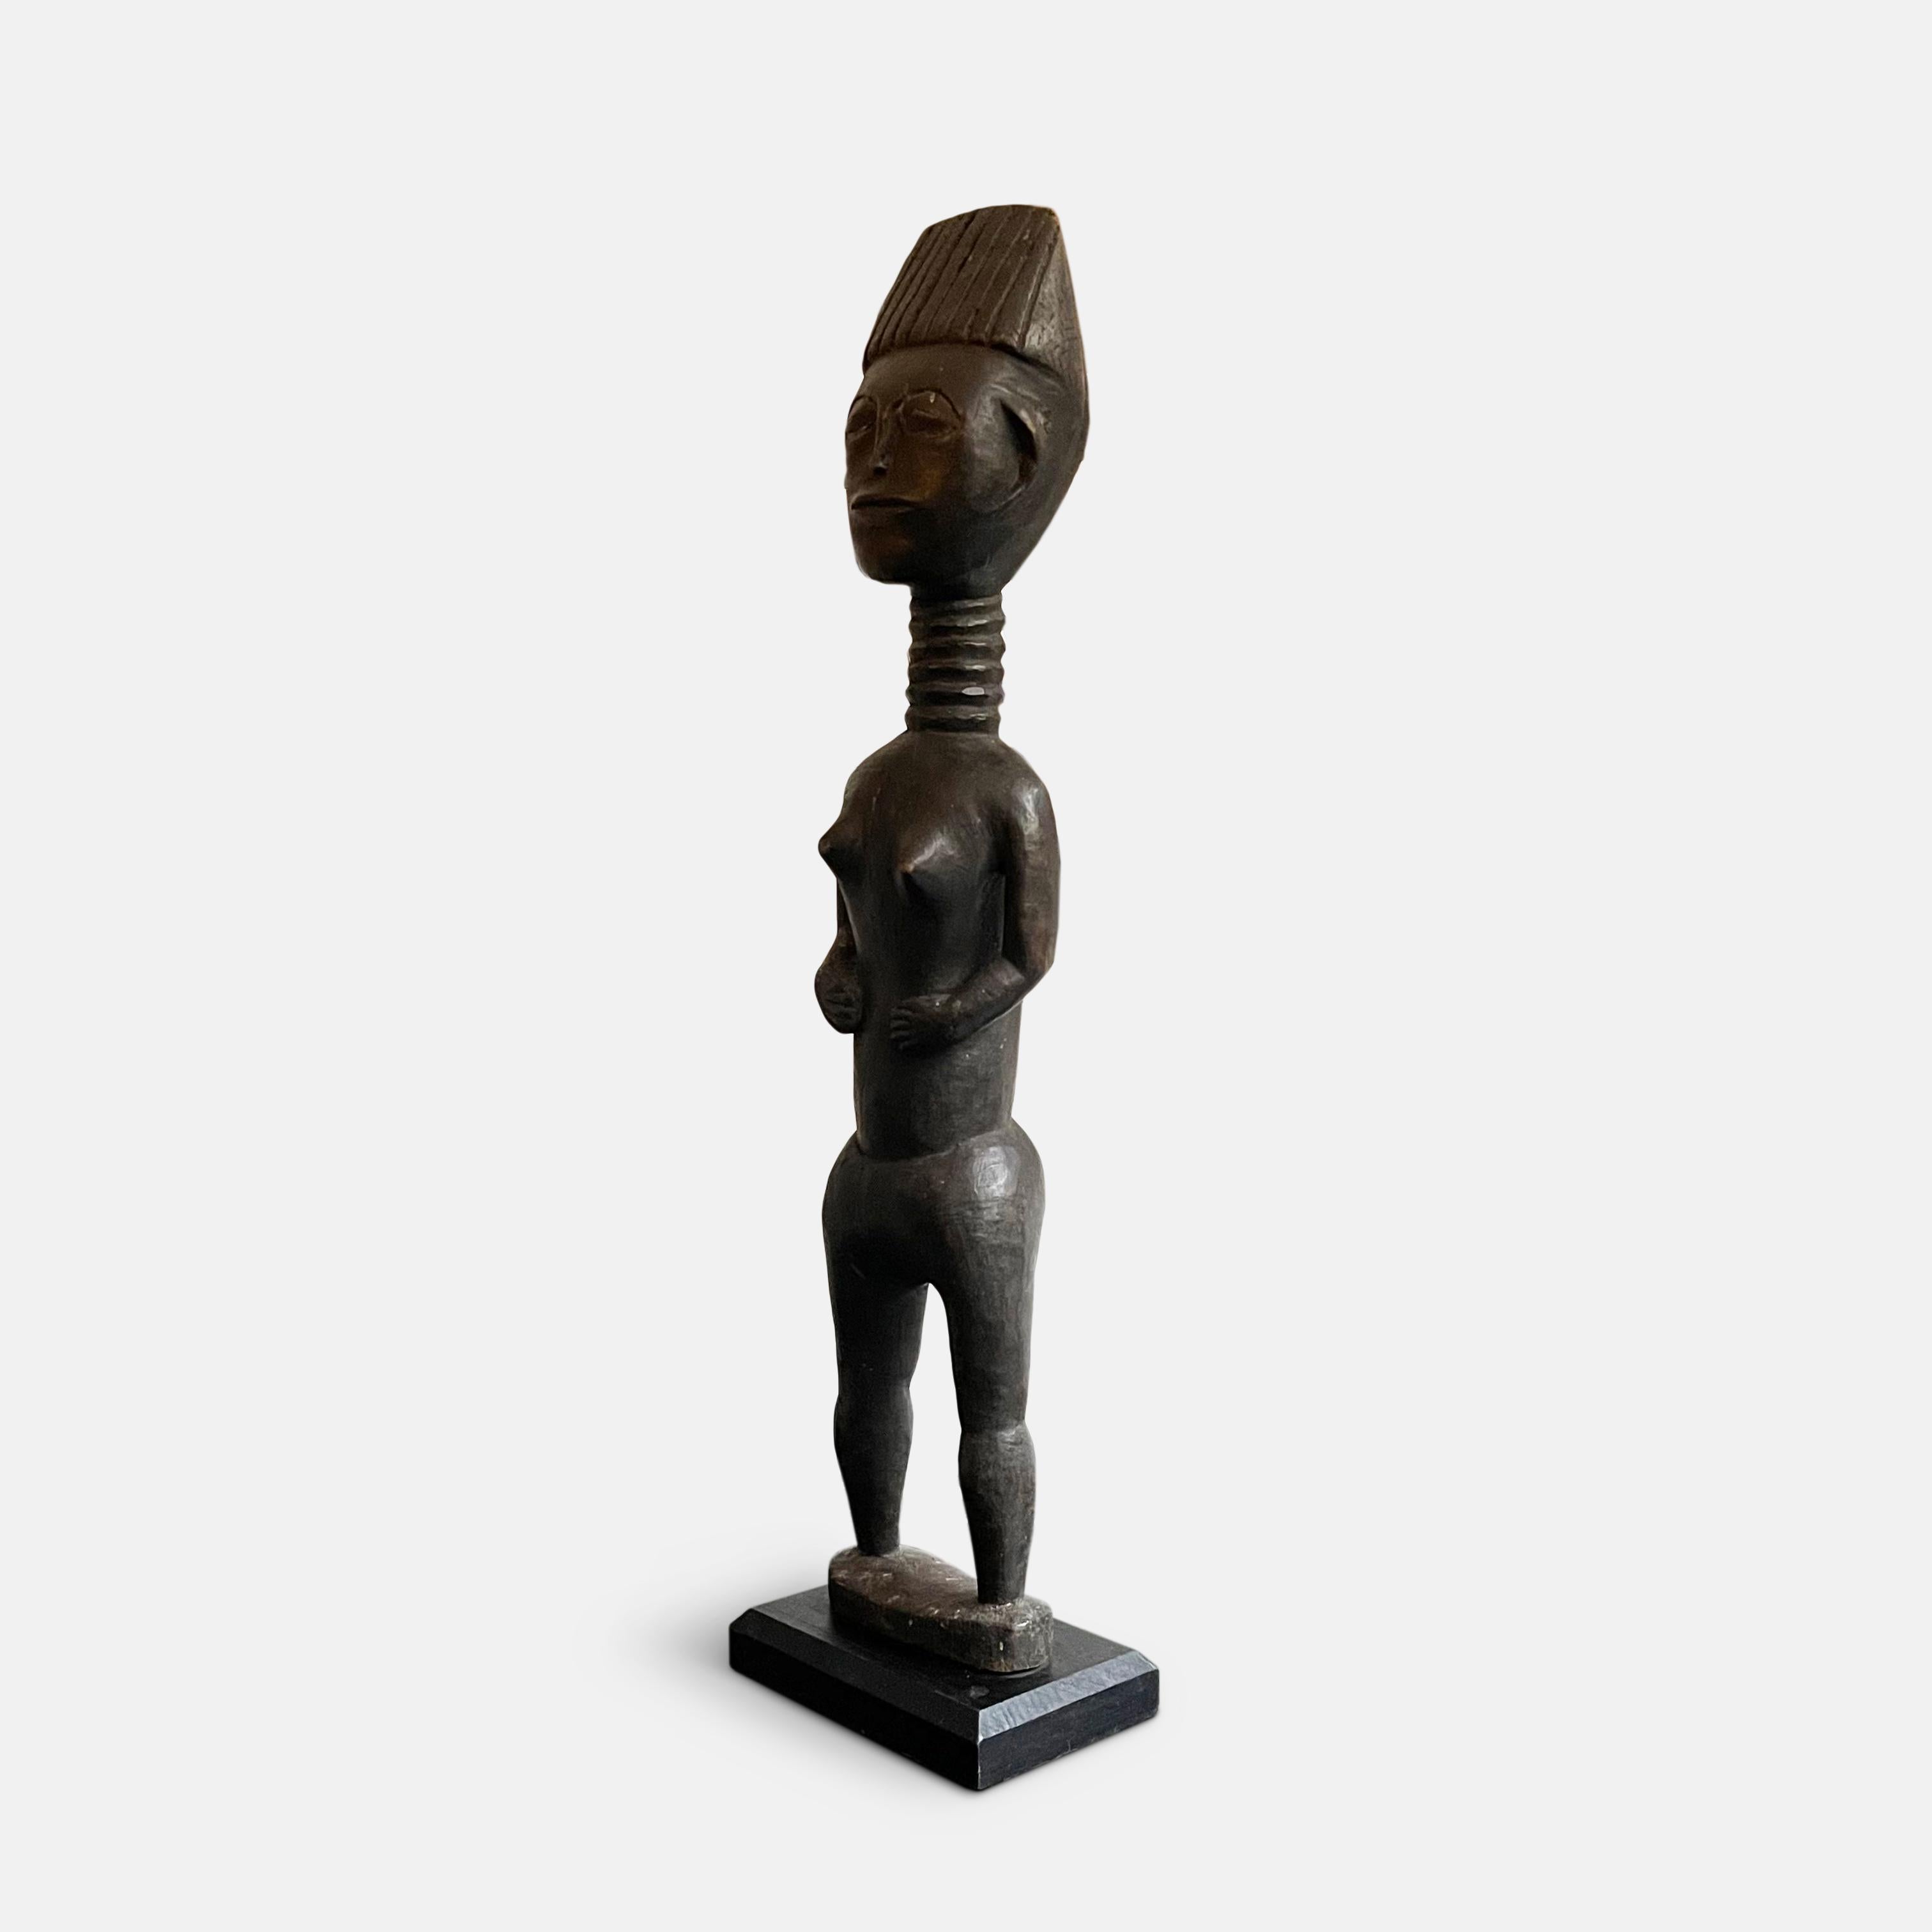 Ivorian Koulango Female Ancestral Statue, Ivory Coast, Early 20th Century For Sale